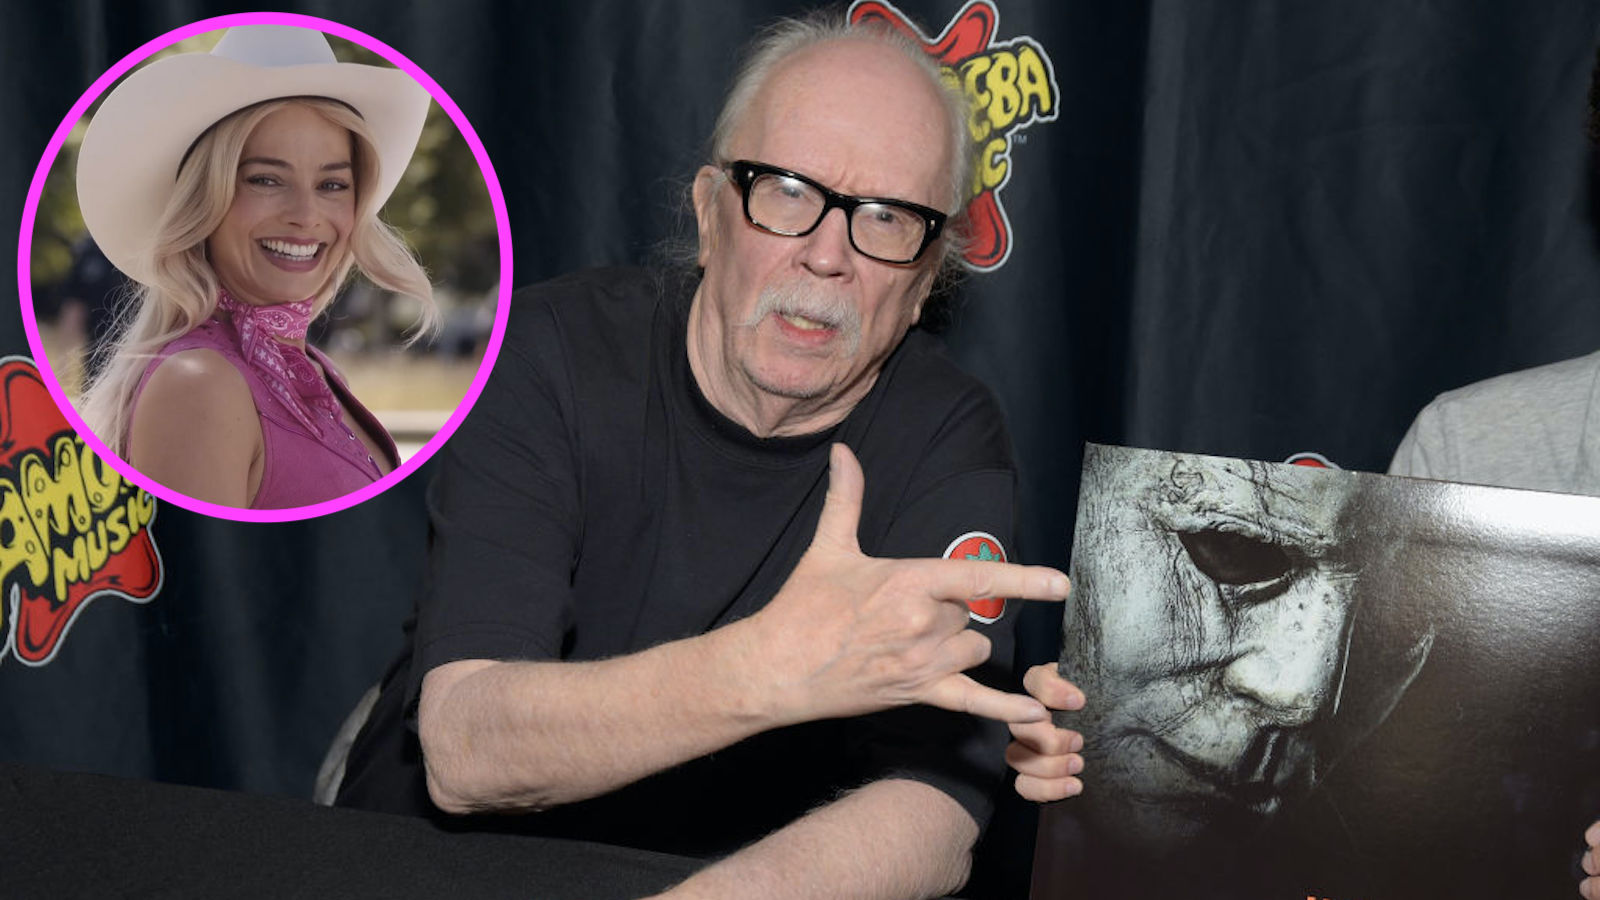 John Carpenter returns to the director's chair with 'Suburban